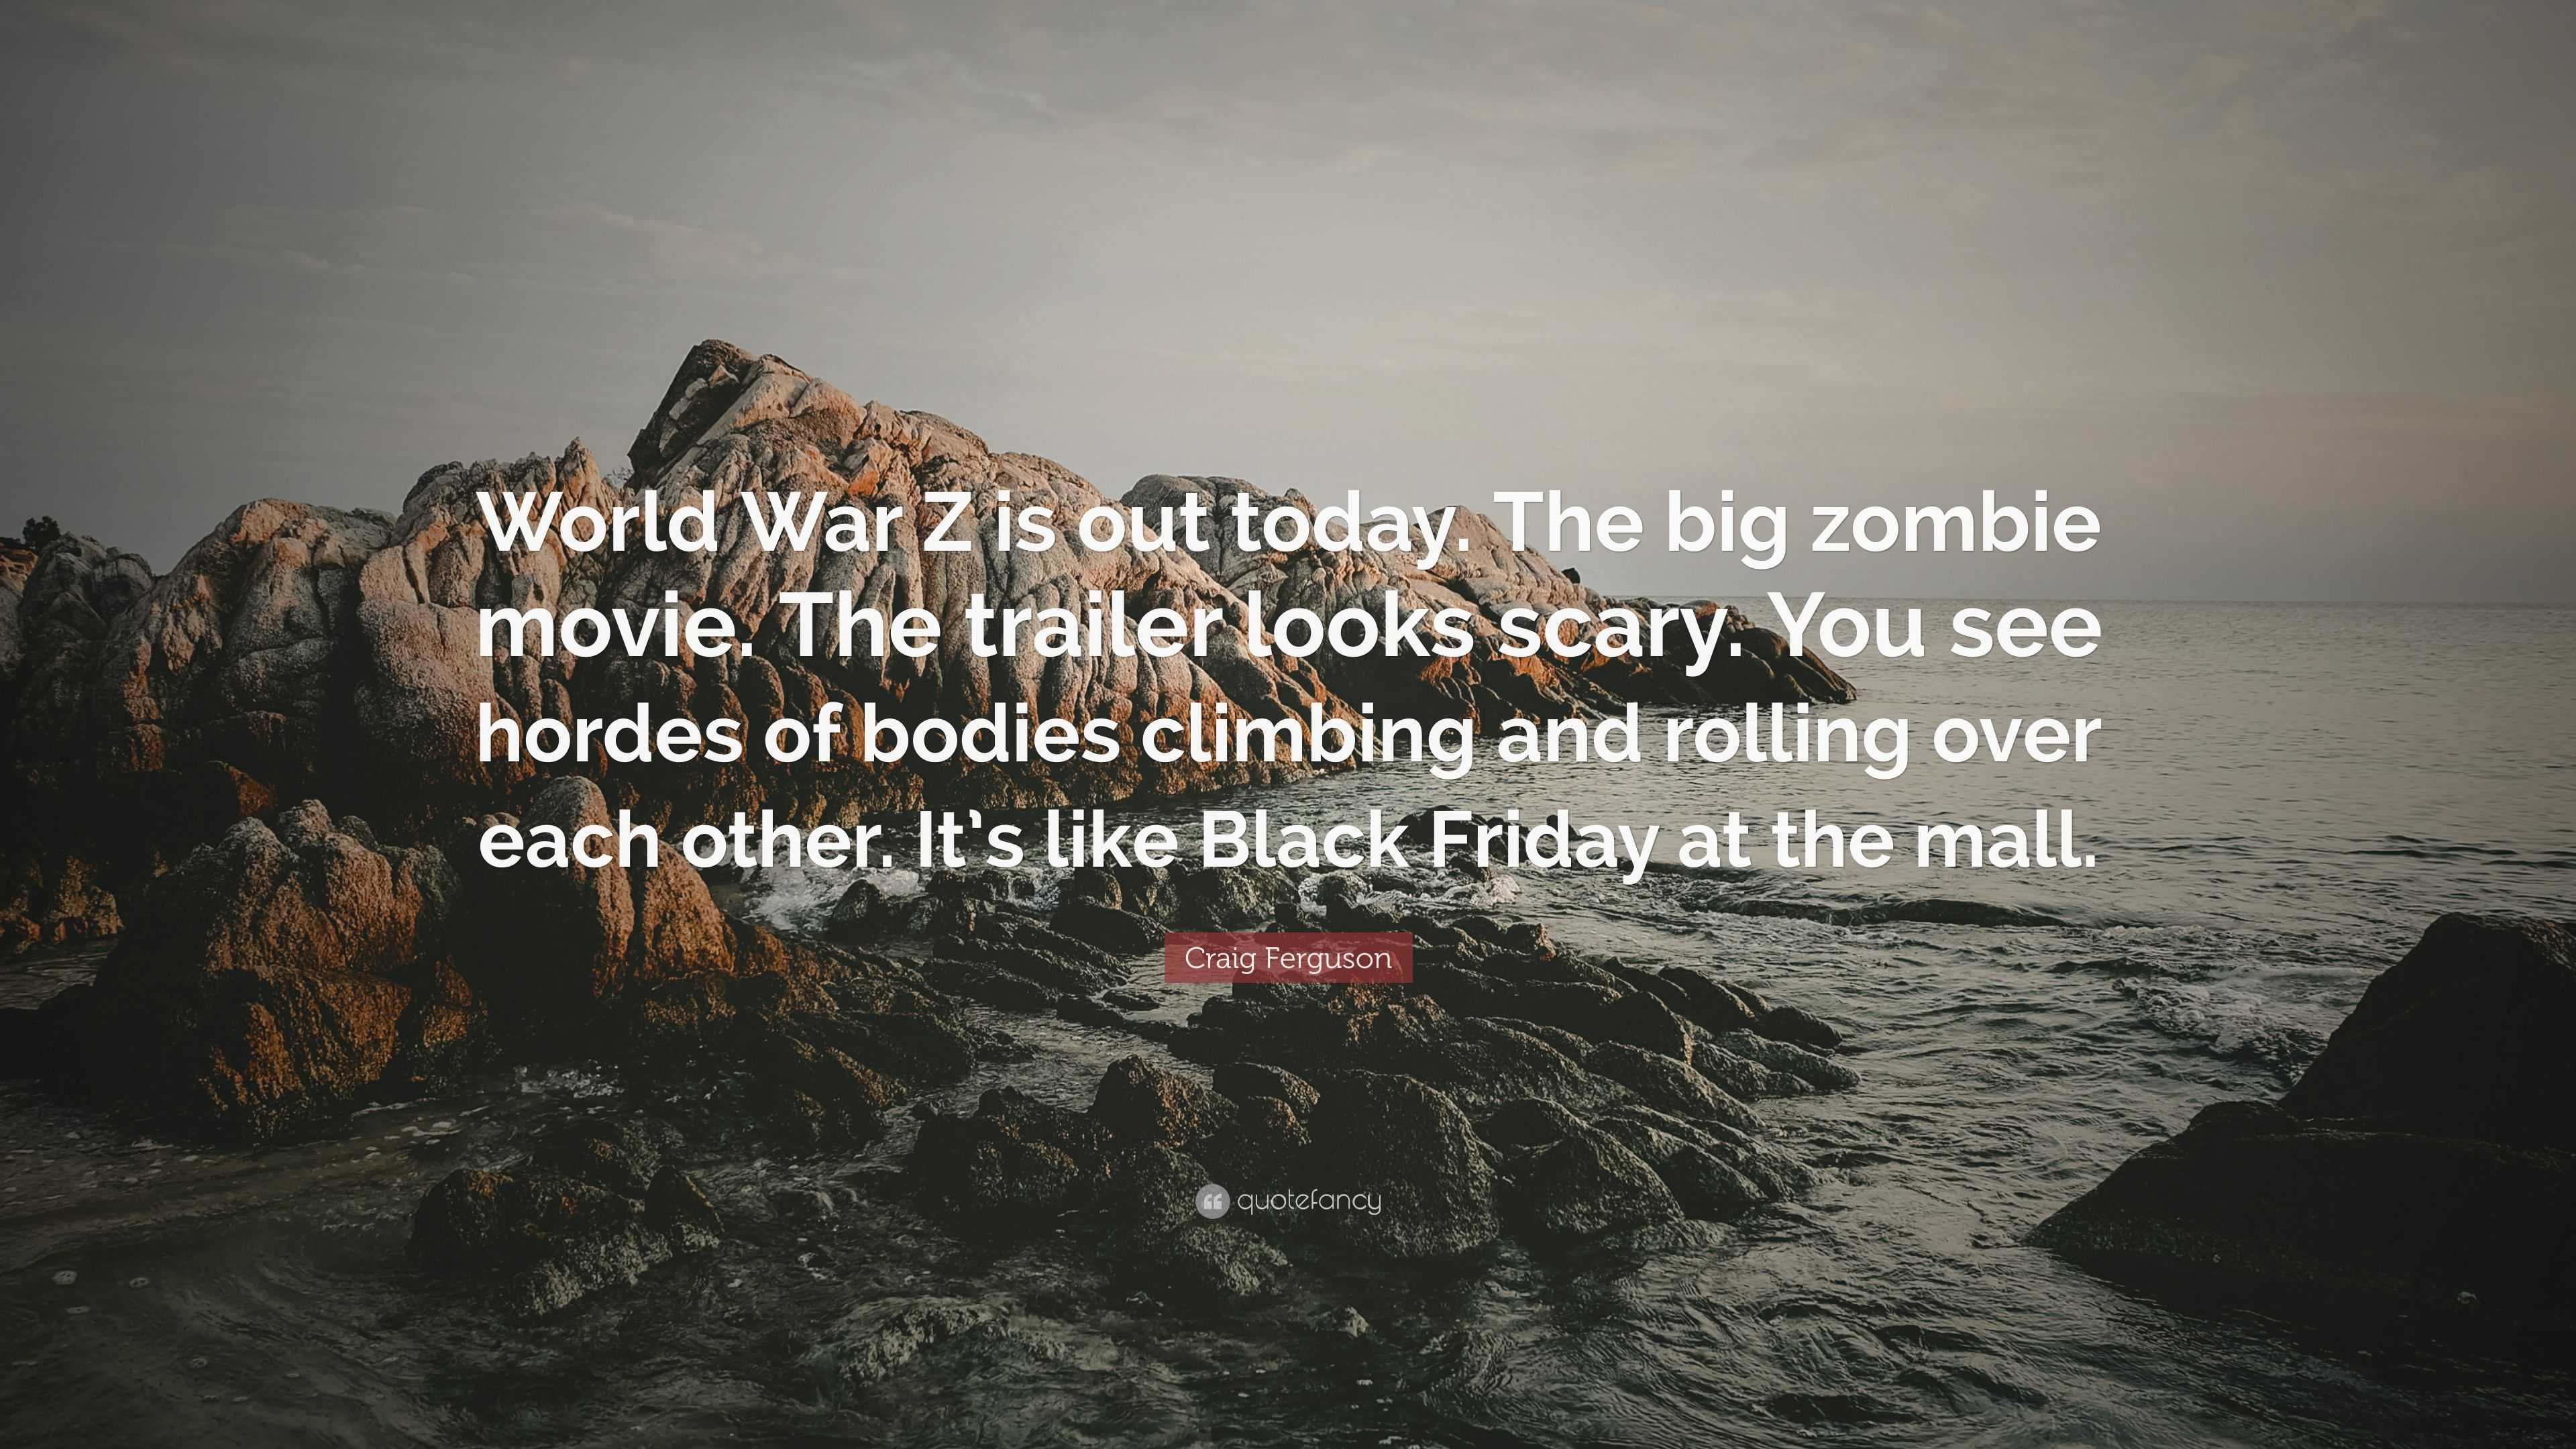 Craig Ferguson Quote World War Z Is Out Today The Big Zombie Movie The Trailer Looks Scary You See Hordes Of Bodies Climbing And Rolling O 6 Wallpapers Quotefancy